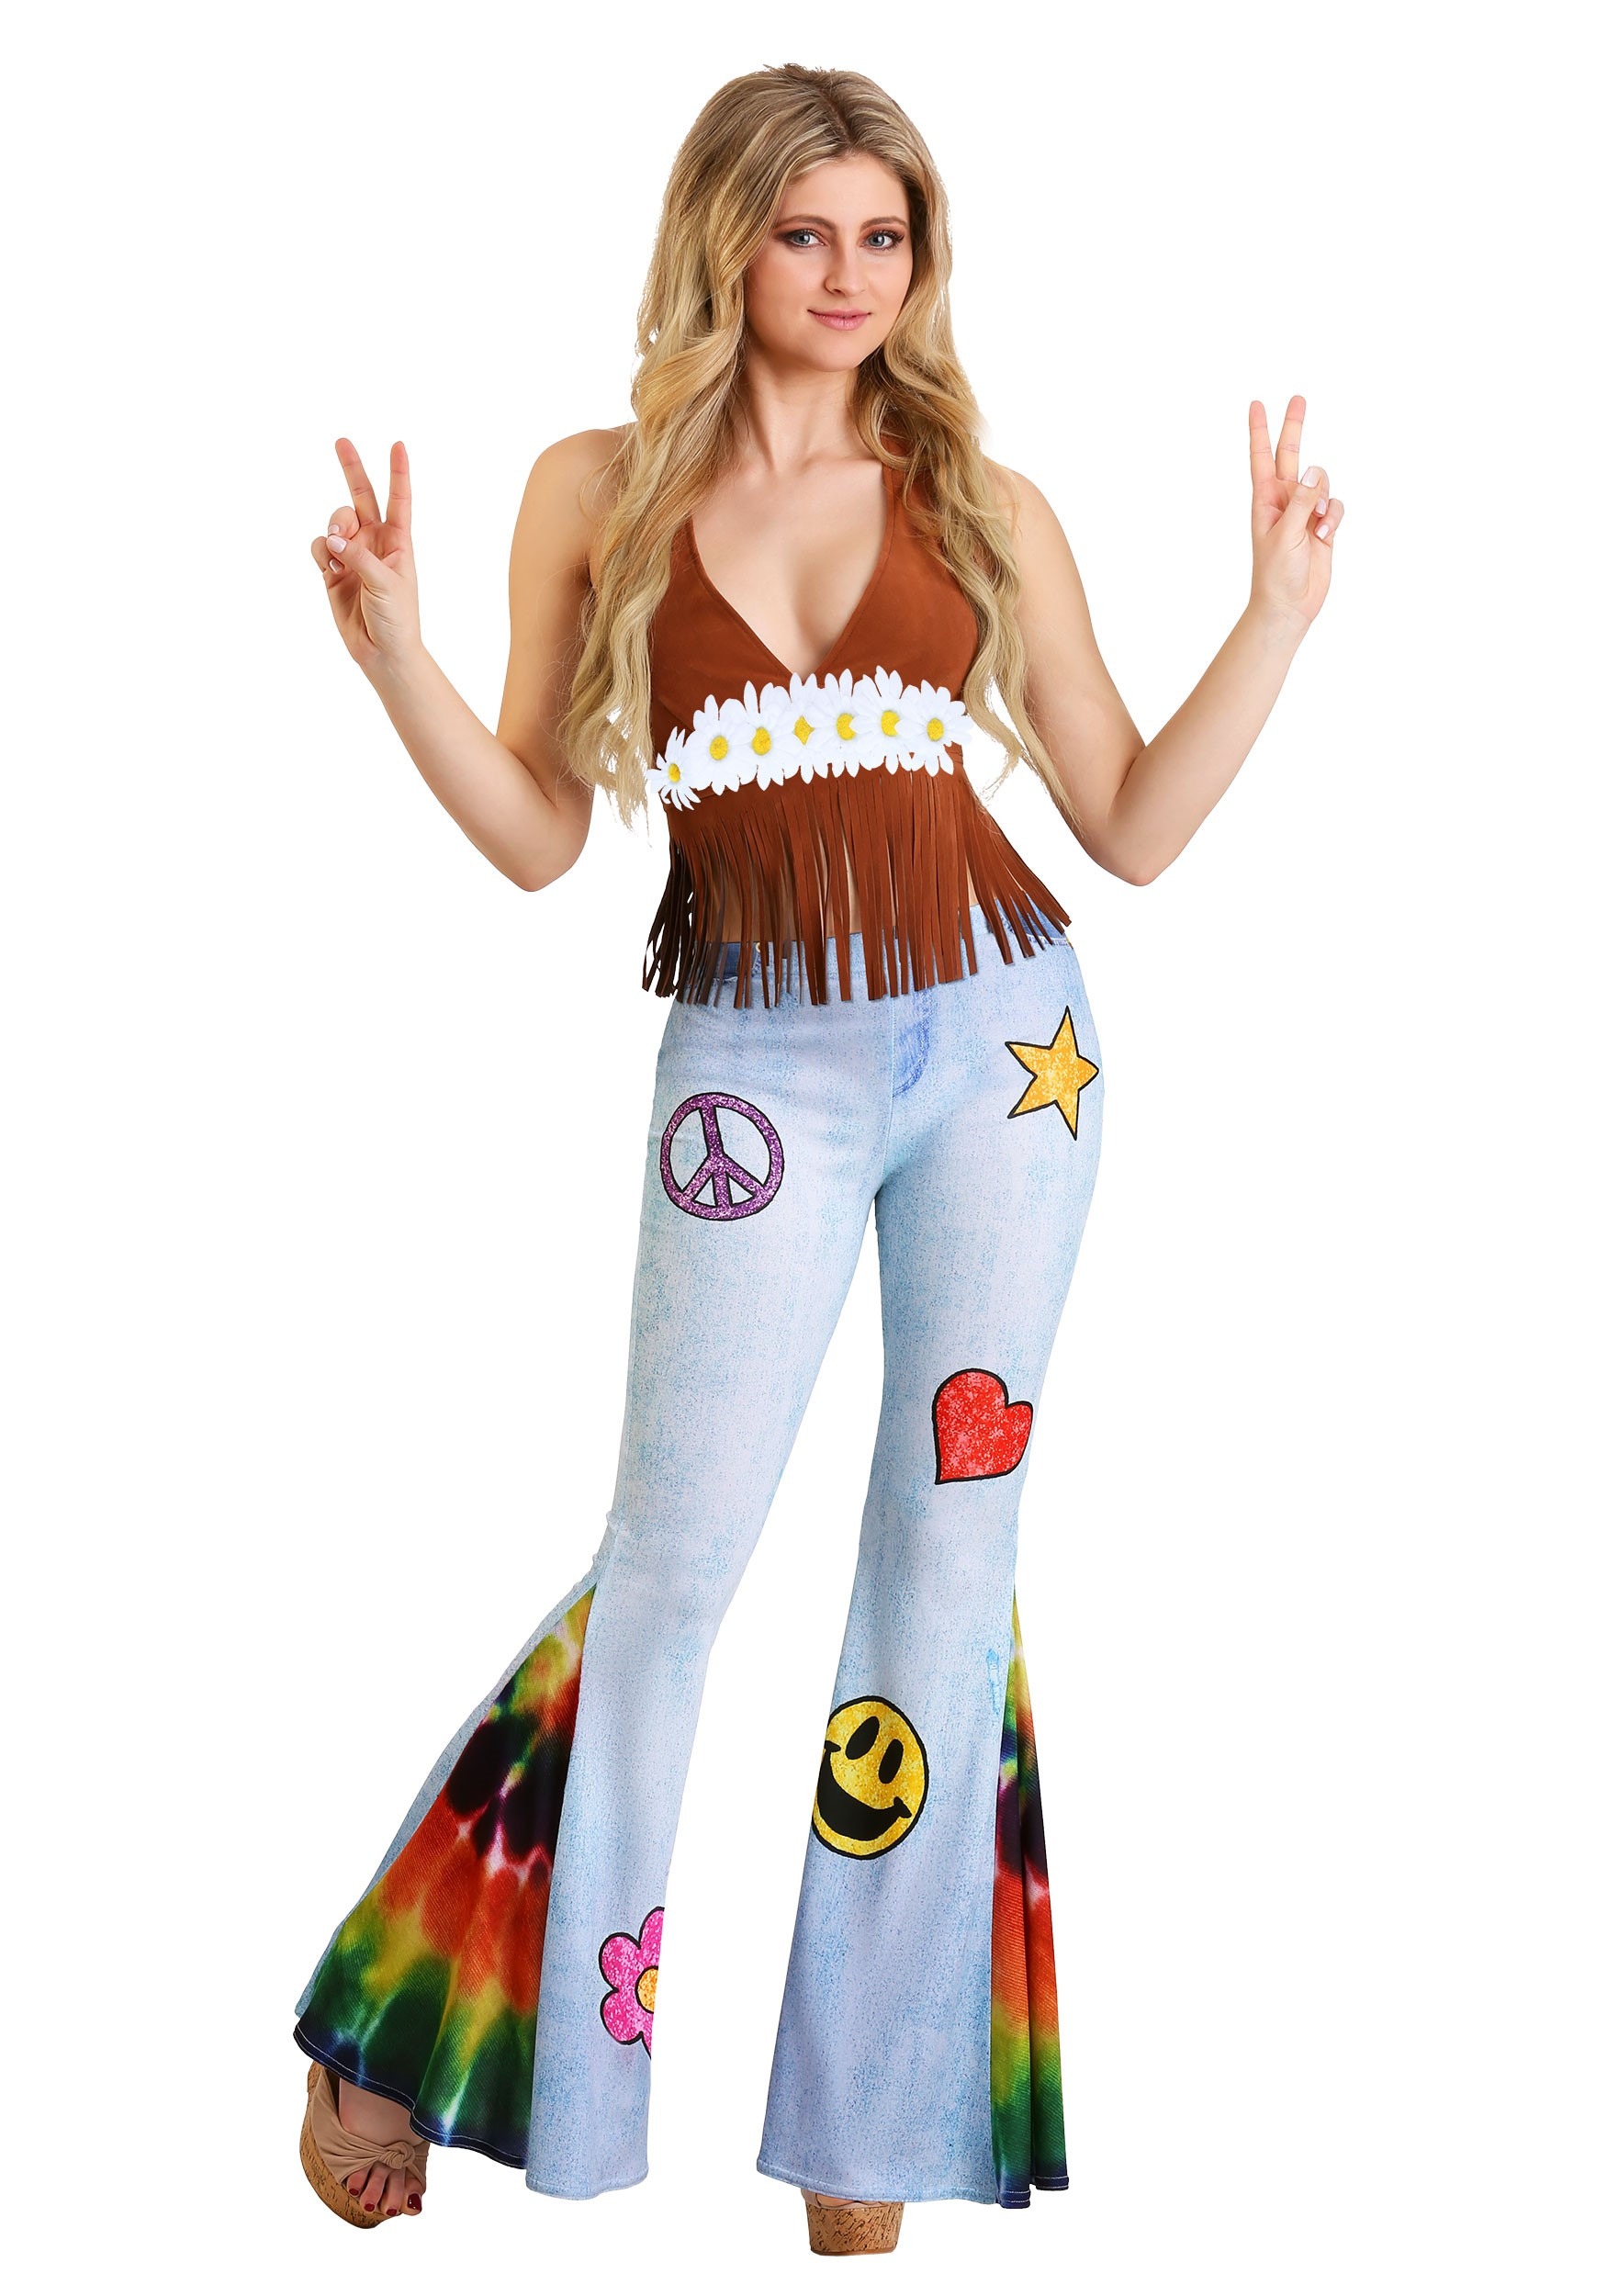 70s Outfits – 70s Style Ideas for Women Patchwork Hippie Womens Costume $34.99 AT vintagedancer.com